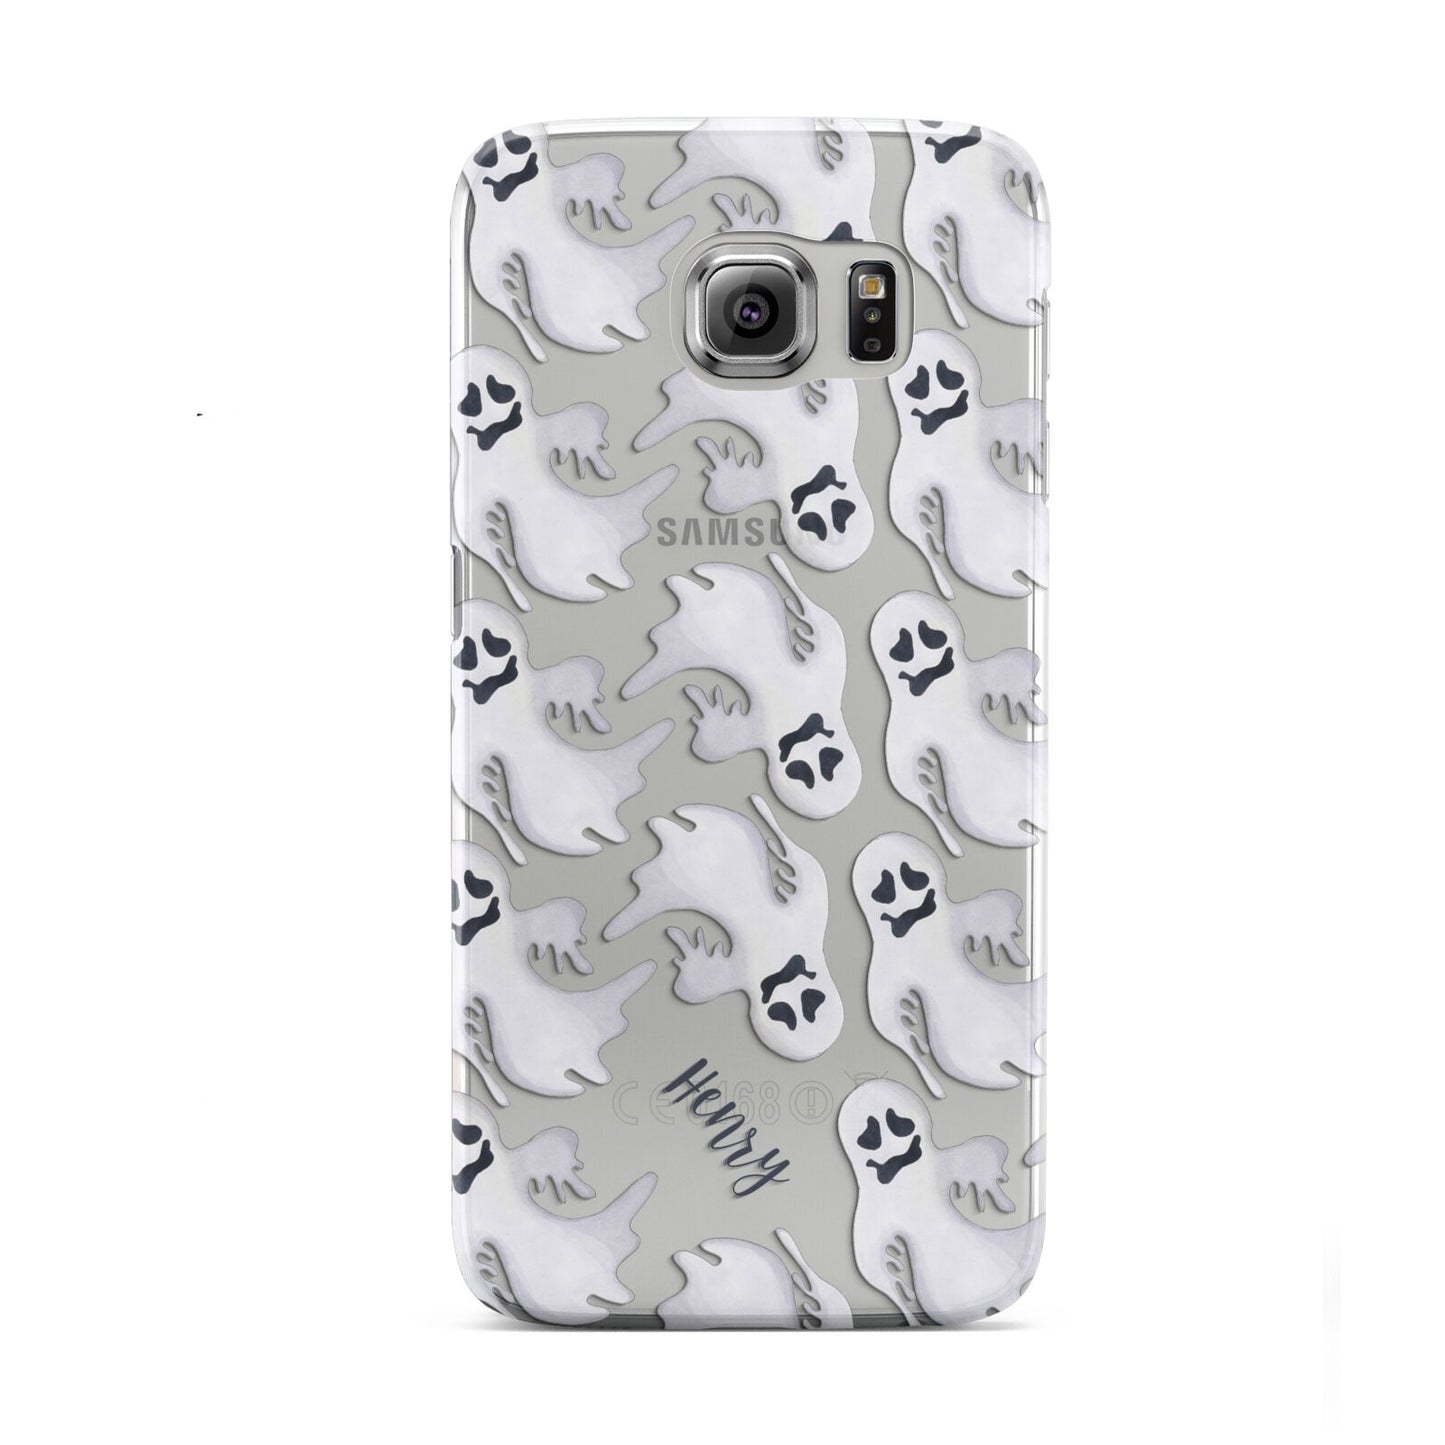 Floaty Ghosts Personalised Samsung Galaxy S6 Case